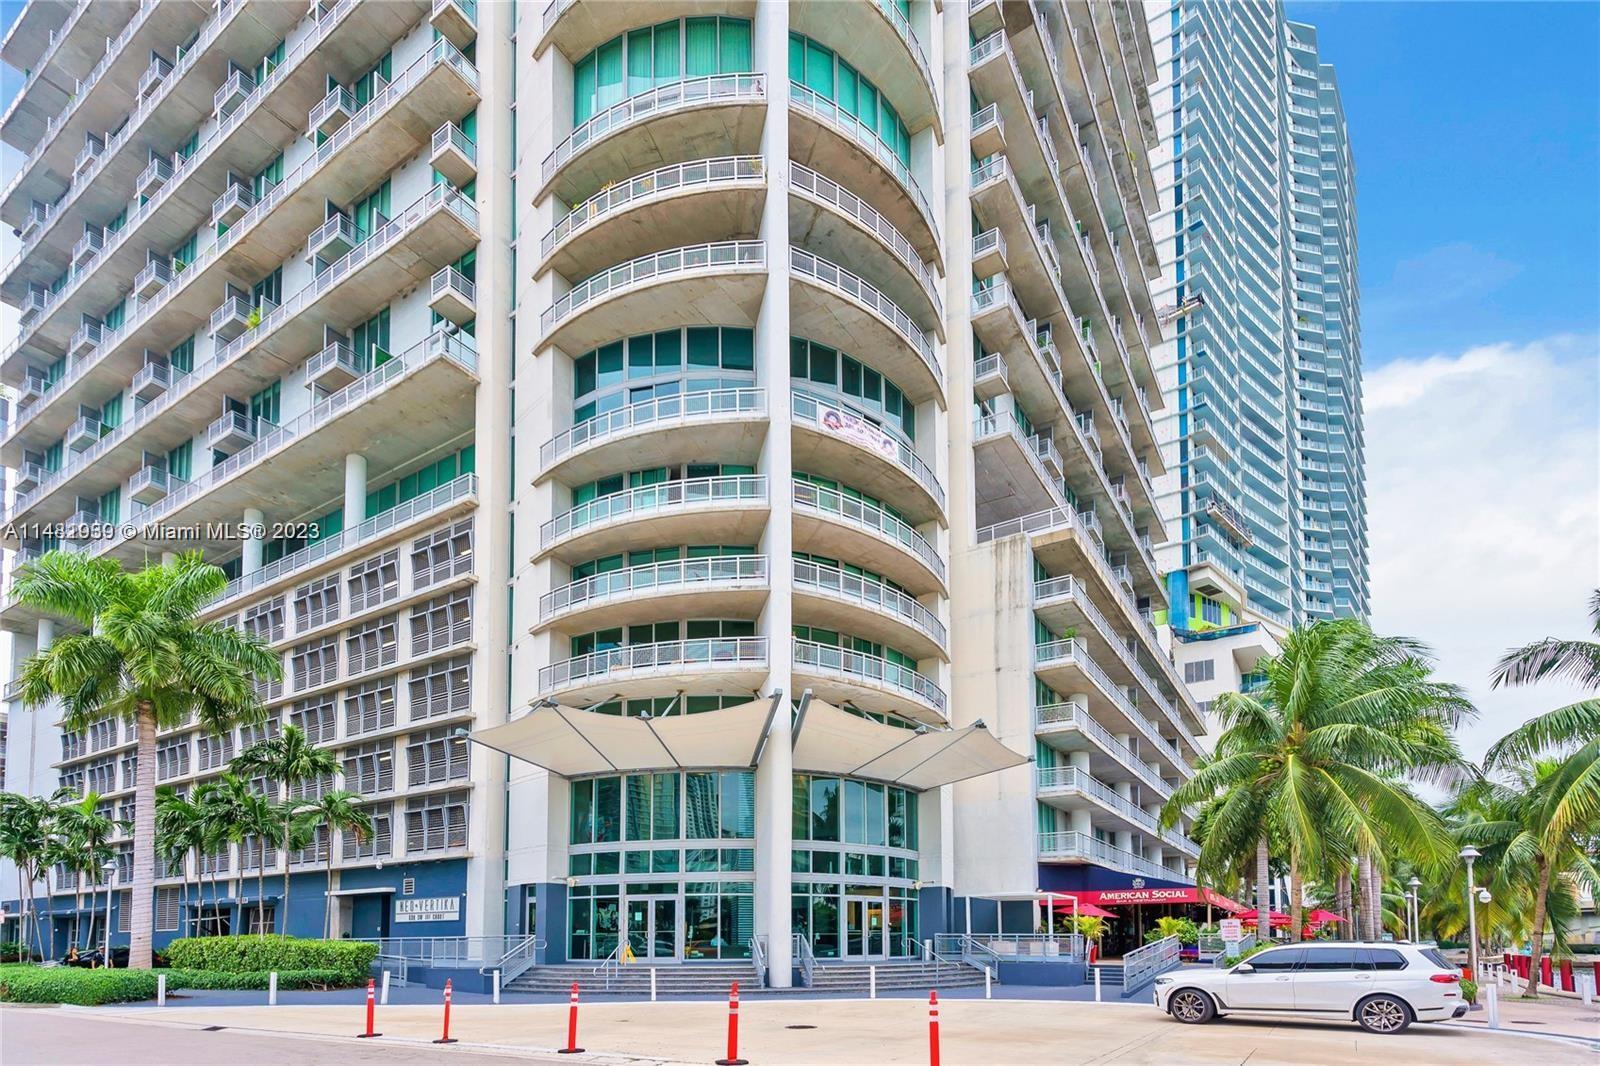 Beautiful 2 story Penthouse Loft in the heart of Brickell-Breathtaking bay & city views-Corner unit-20Ft to ceiling impact windows-Upgraded: porcelain 1st flr, wood in 2nd flr, ceiling refinished, bathrooms redone-Kitchen upgraded w/new SS appliances, granite-New A/C-All open plan NYC loft style-Master suite upstairs w/bonus office space-Large balcony-Inside laundry- Riverfront dining, infinity pool, Jacuzzi, sauna, full fitness center, party room, racquetball/basketball/pickle ball courts, Dojo, CrossFit, library, business center, party room, boxing area, dog park-children play area- 24-hour Concierge-Valet for visitors-Walking distance to Mary Brickell Village, Brickell City Center, restaurants, Metro mover- Walk along the Miami river- 2 pkng spaces (1 assigned + 1 free valet)-